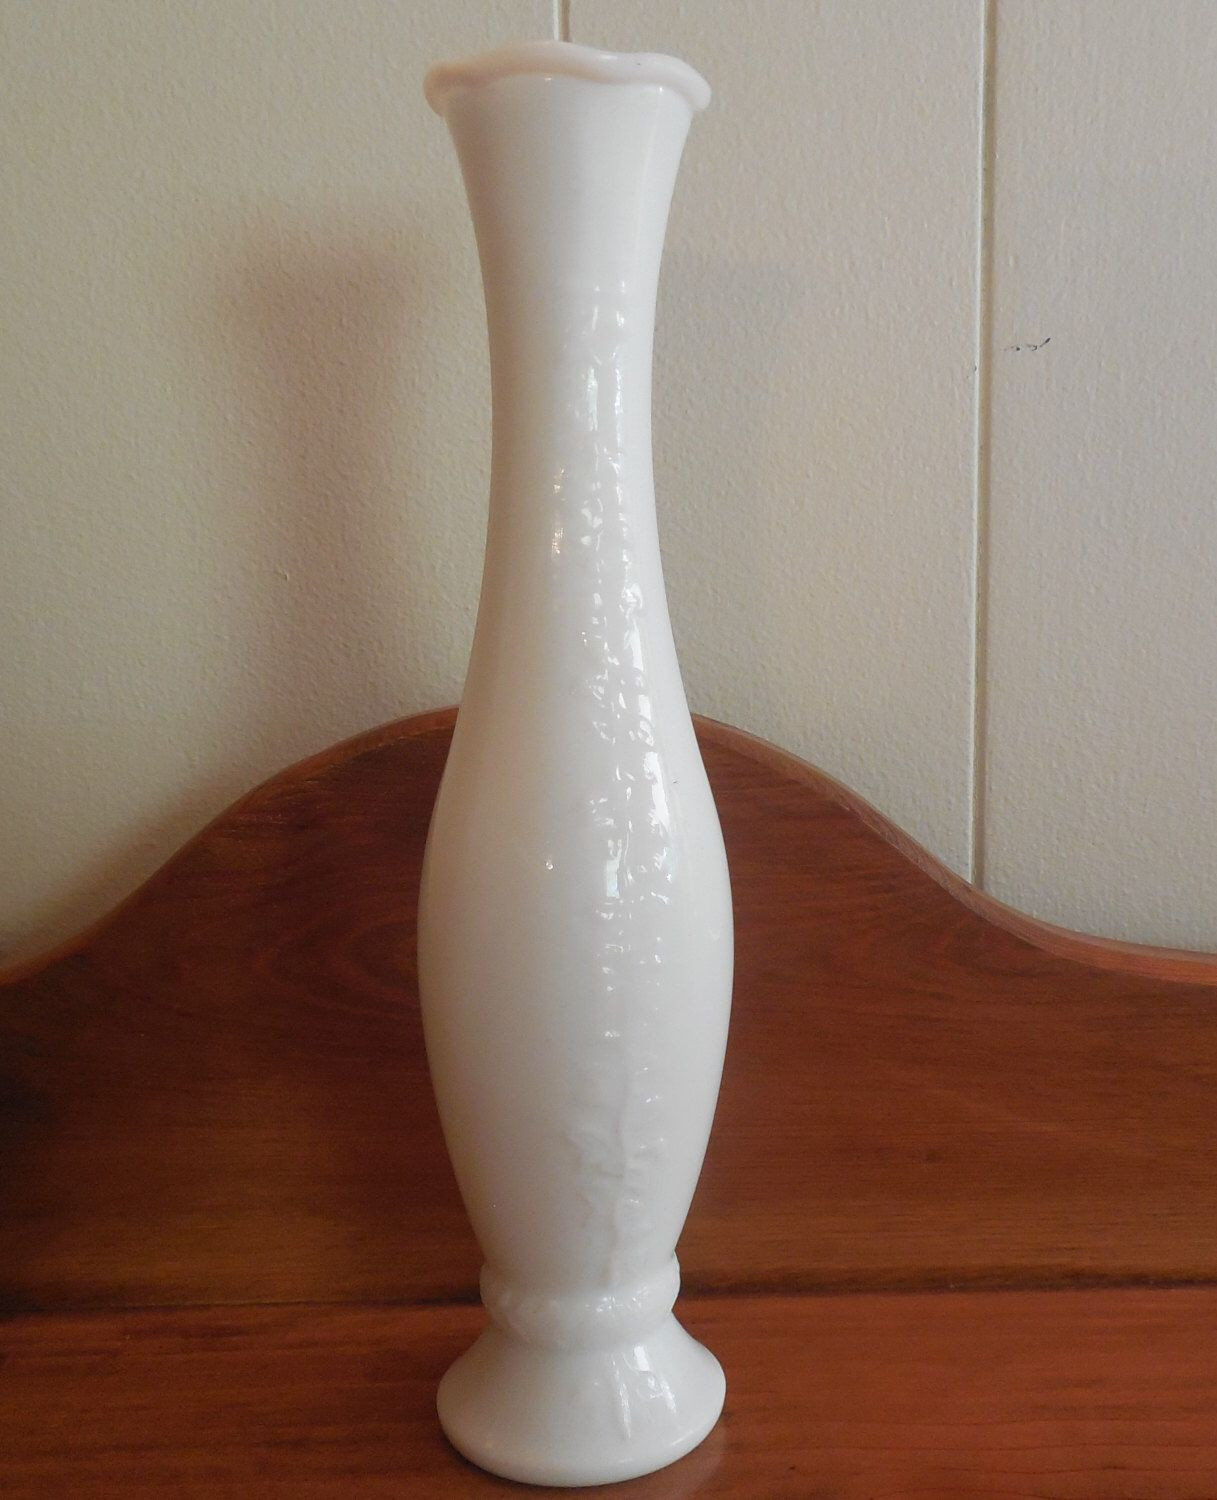 20 Fabulous Tall Thin Clear Glass Vases 2023 free download tall thin clear glass vases of milk glass bud vase 10 vintage milk glass vase tall and slim vase in vase